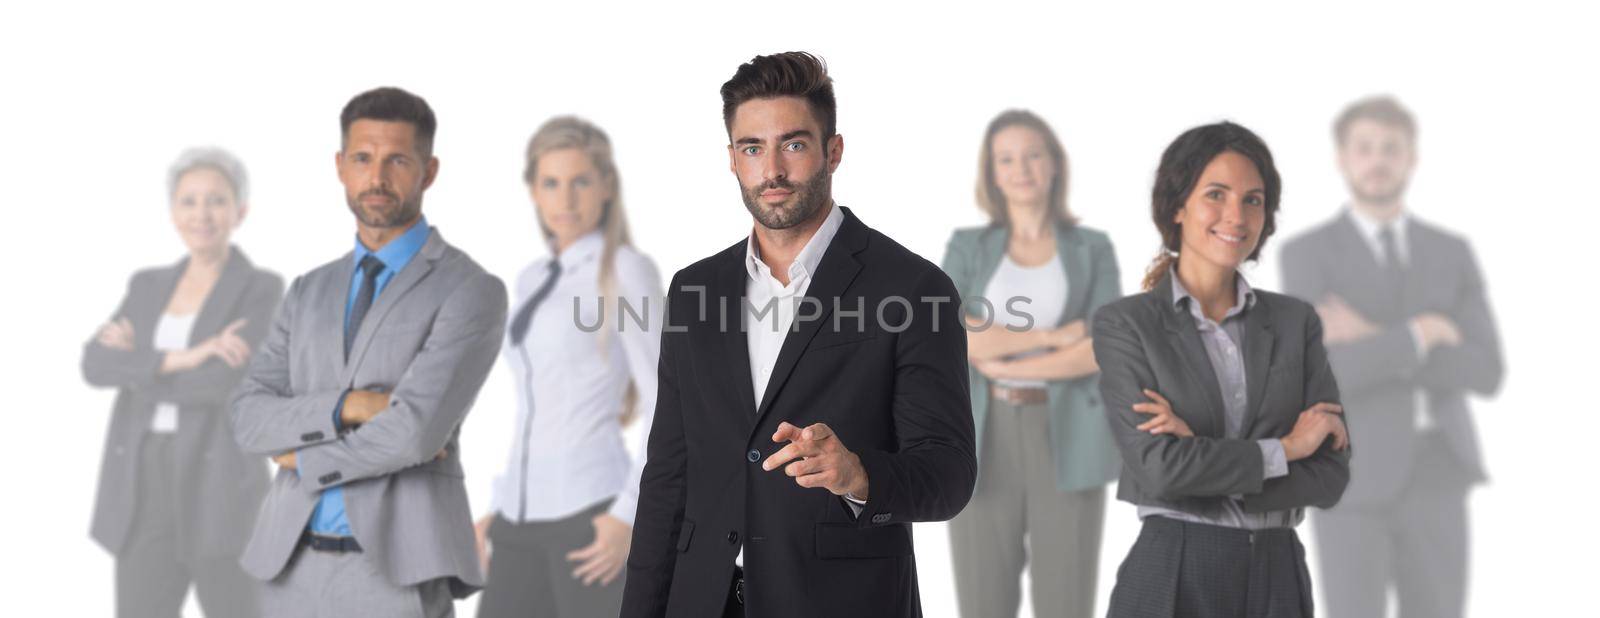 Group of business people standing together isolated on white background, unity cooperation teamwork concept